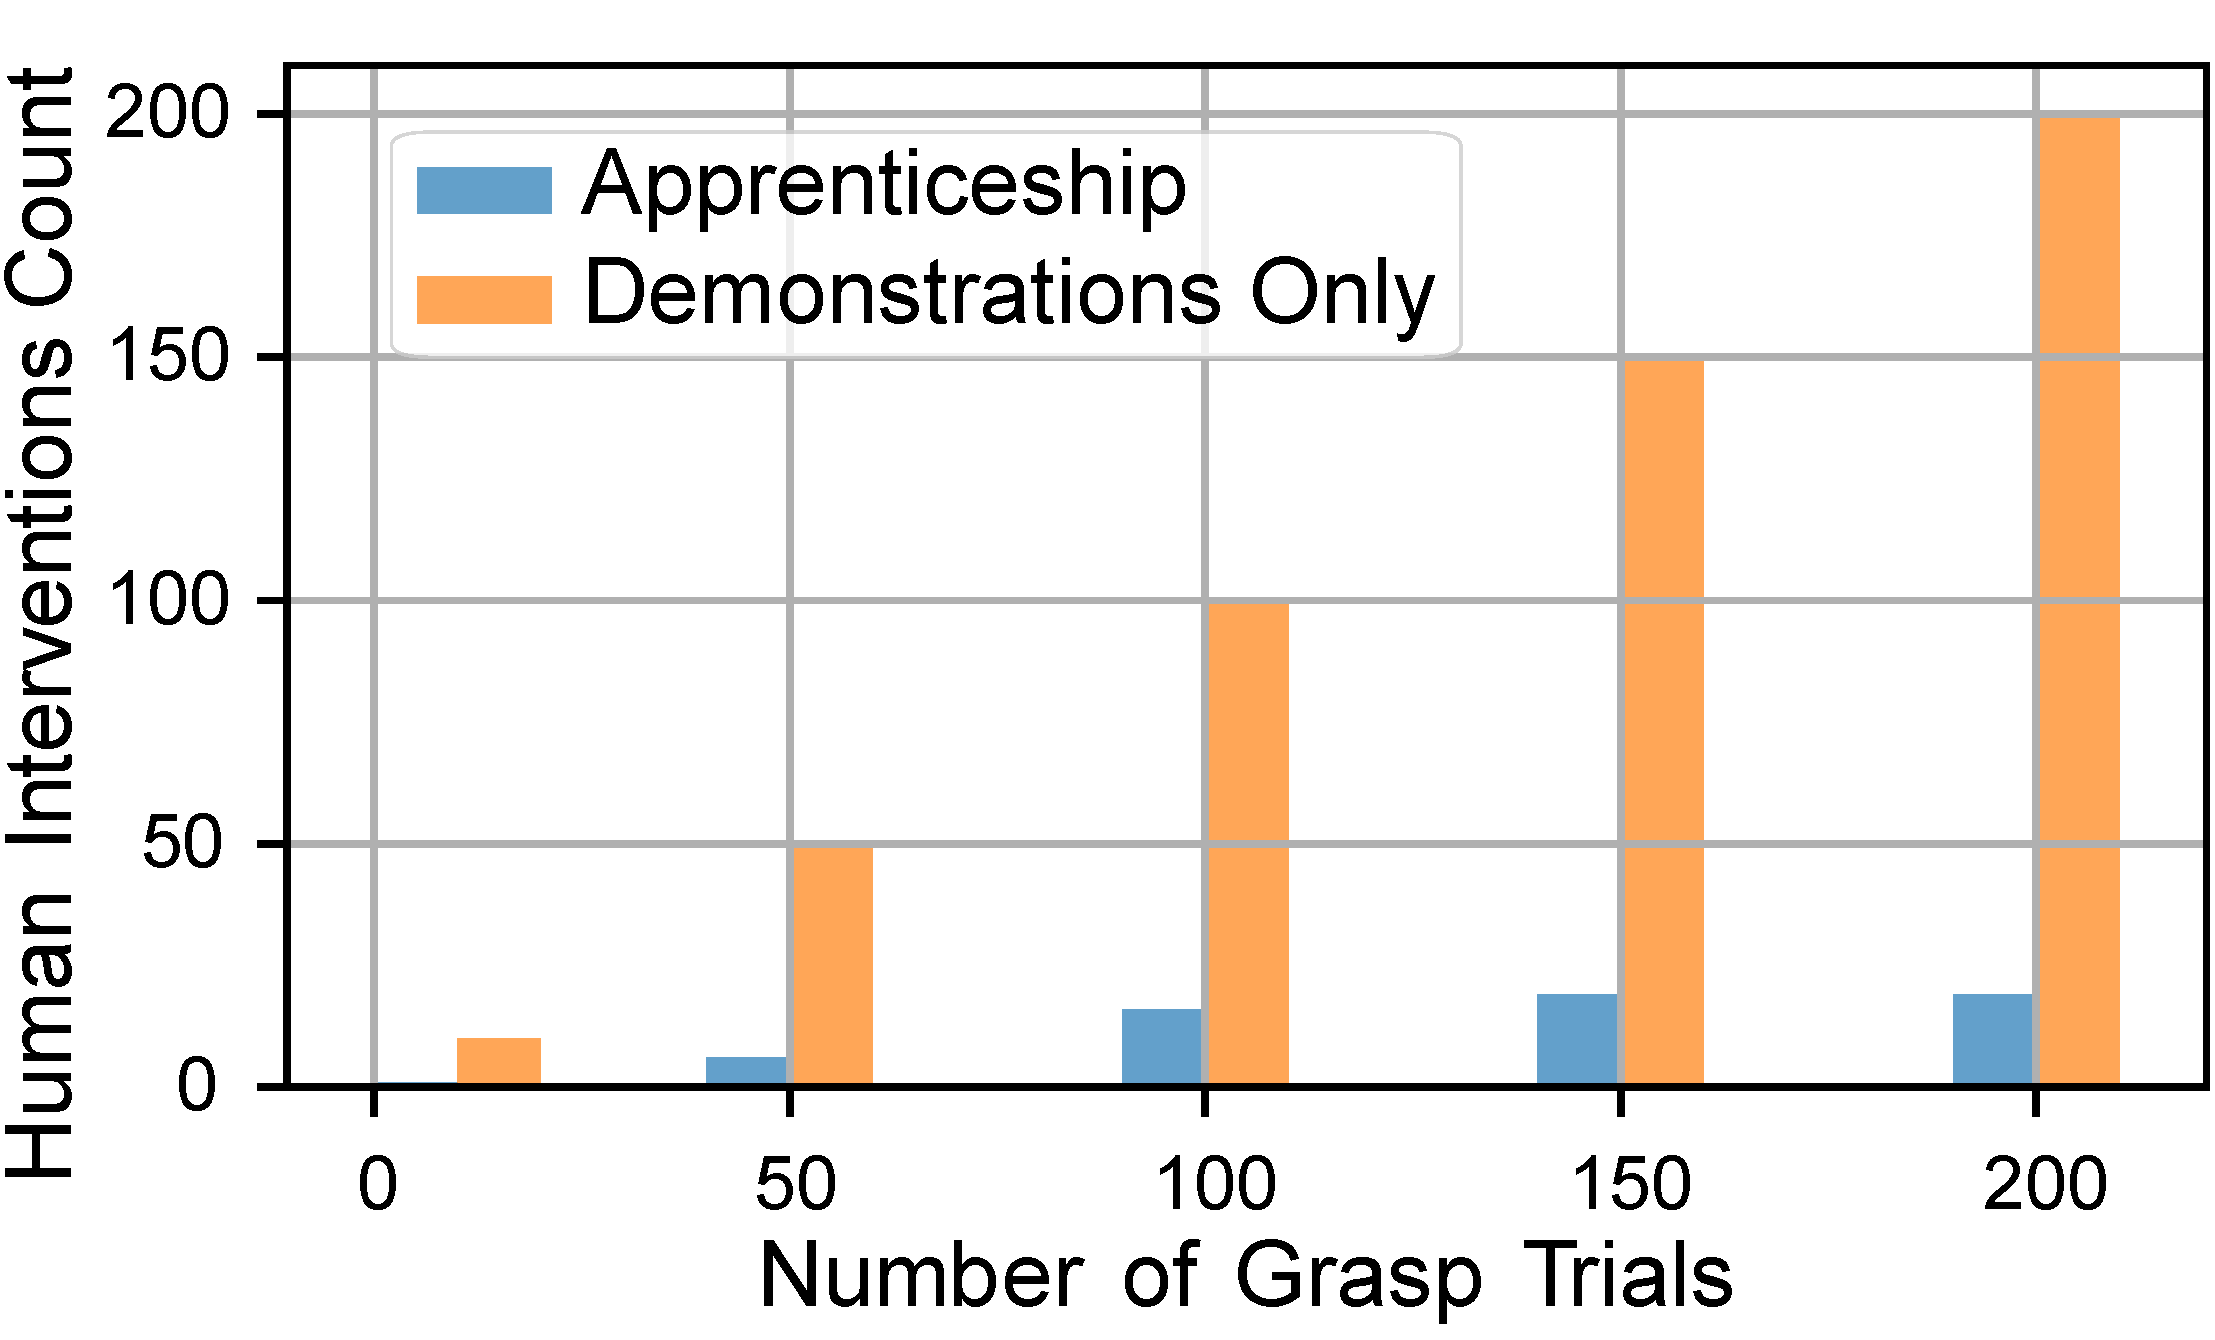 Learning by demonstration requires human intervention for every trial, while the apprenticeship model only requests help when the robot cannot solve the task on its own.